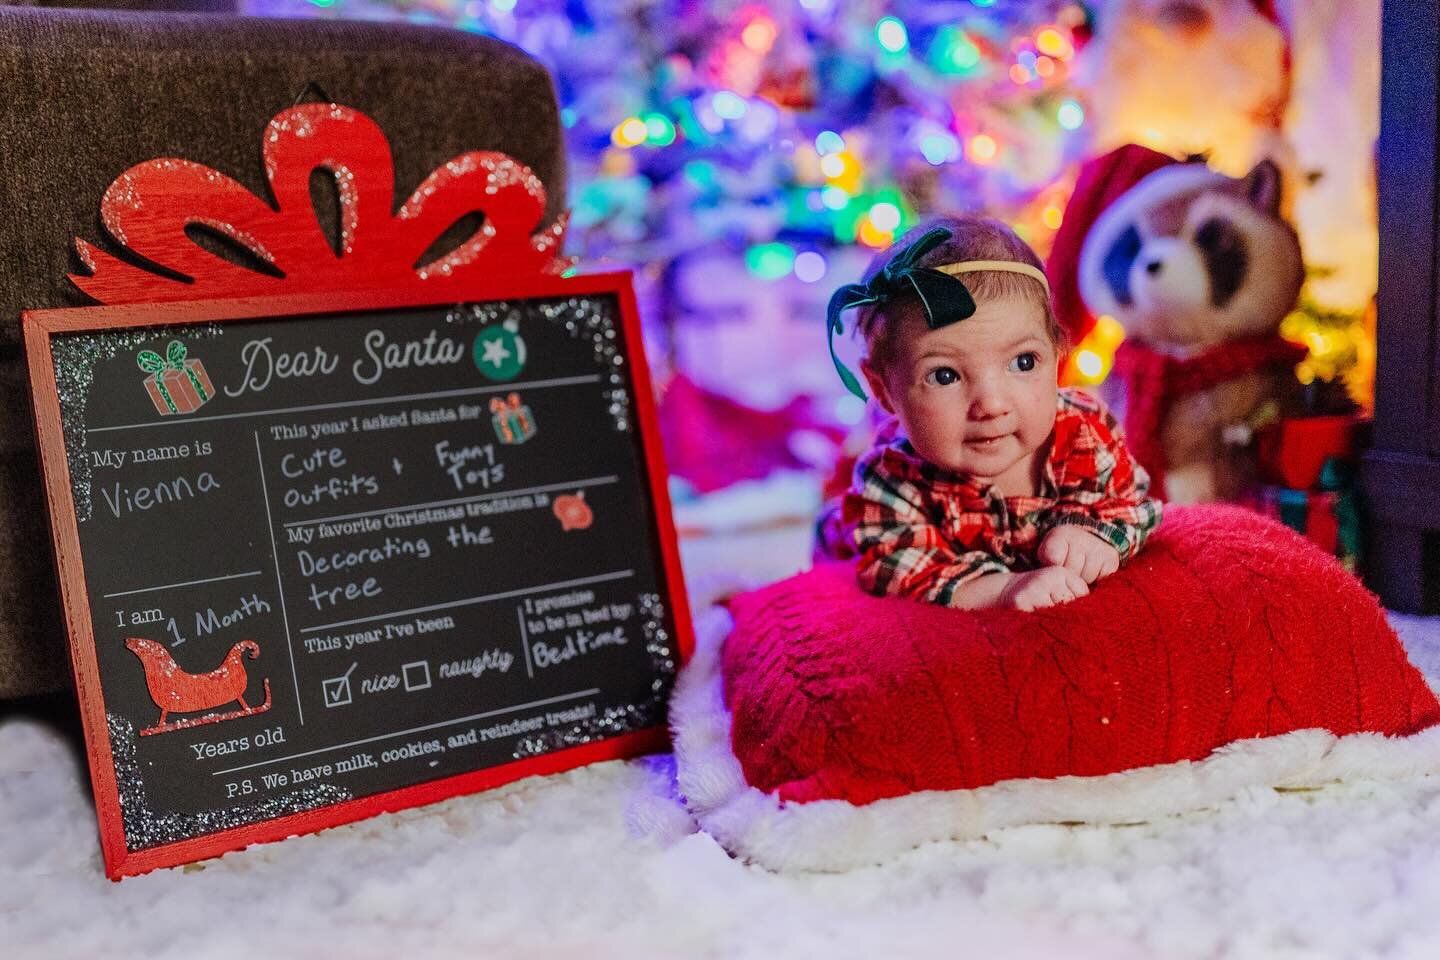 Merry Christmas to my little family to yours! 🤍❤️
&bull;
&bull;
&bull;
Sweet Vi, you are the most precious gift we could ask for. We love you! 🎄 #christmas #love #happyholidays #2023